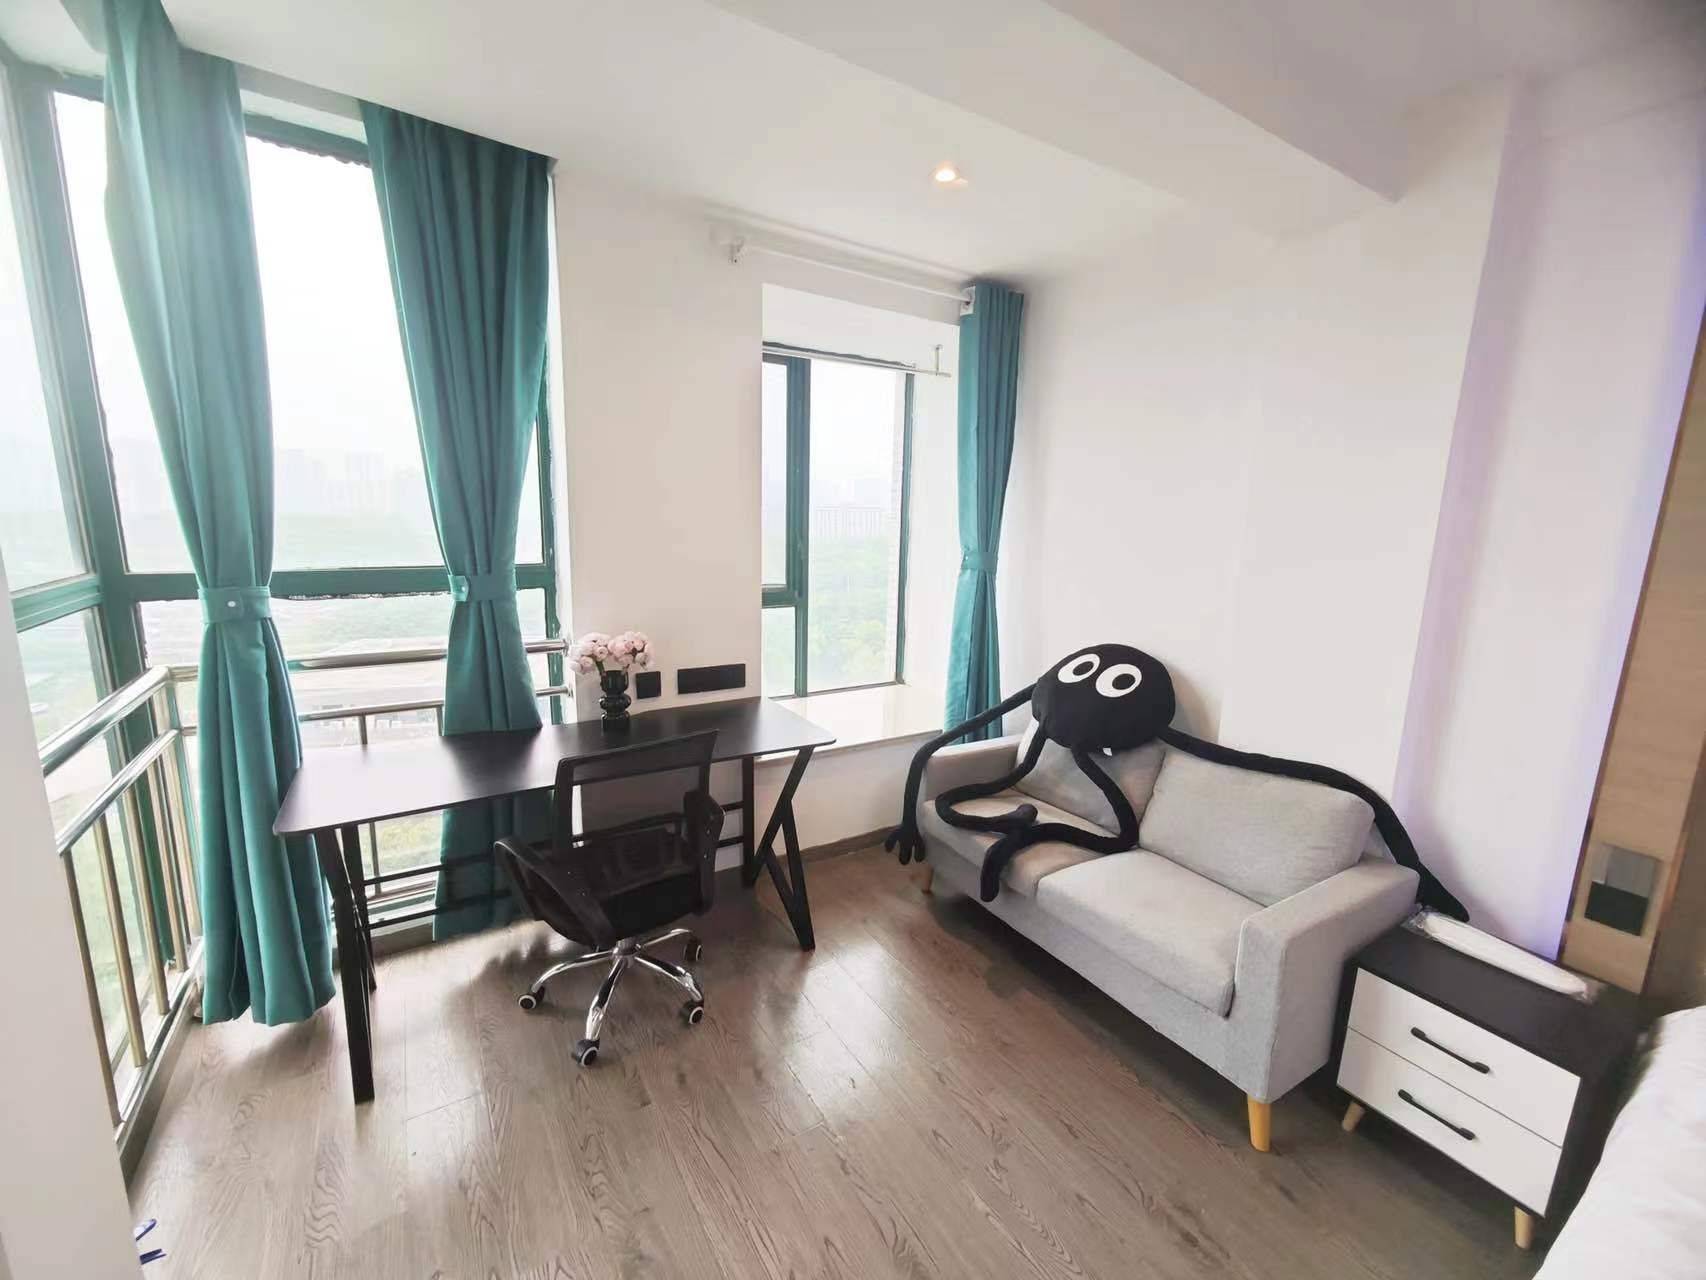 Nanjing-Yuhuatai-Cozy Home,Clean&Comfy,No Gender Limit,Hustle & Bustle,“Friends”,Chilled